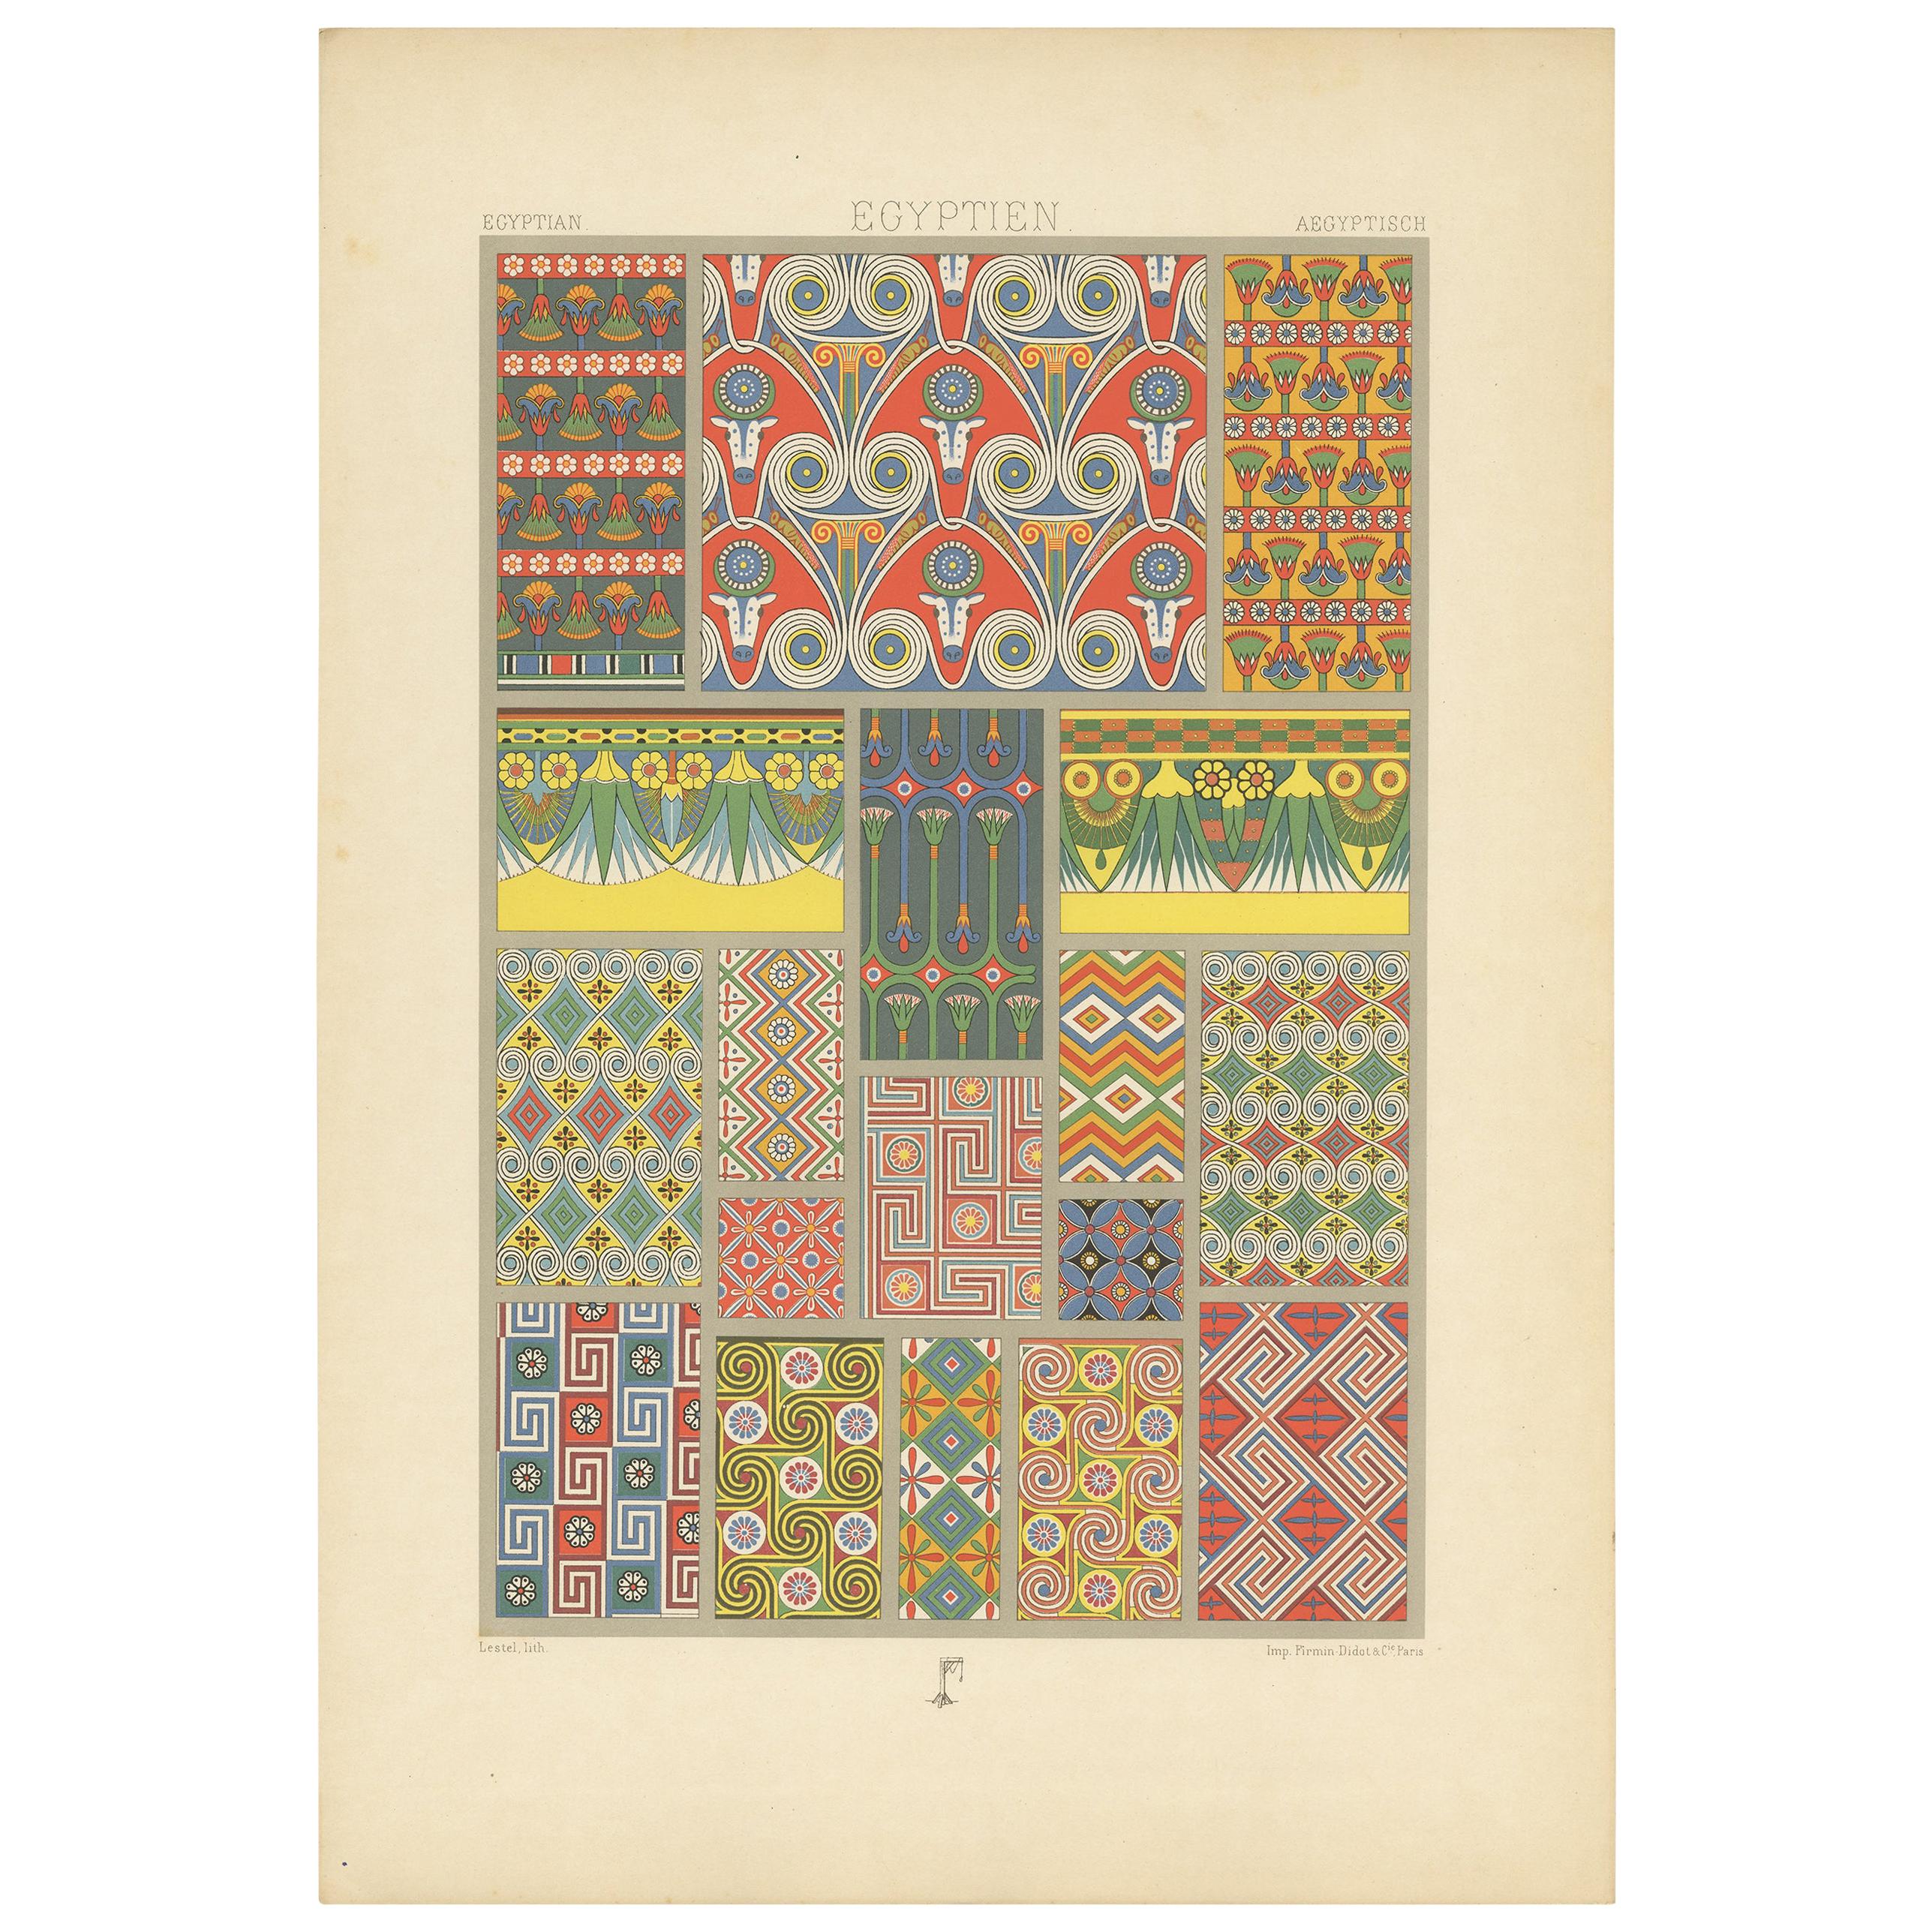 Pl. 3 Antique Print of Egyptian Painted Tomb Ceiling by Racinet, 'circa 1890'